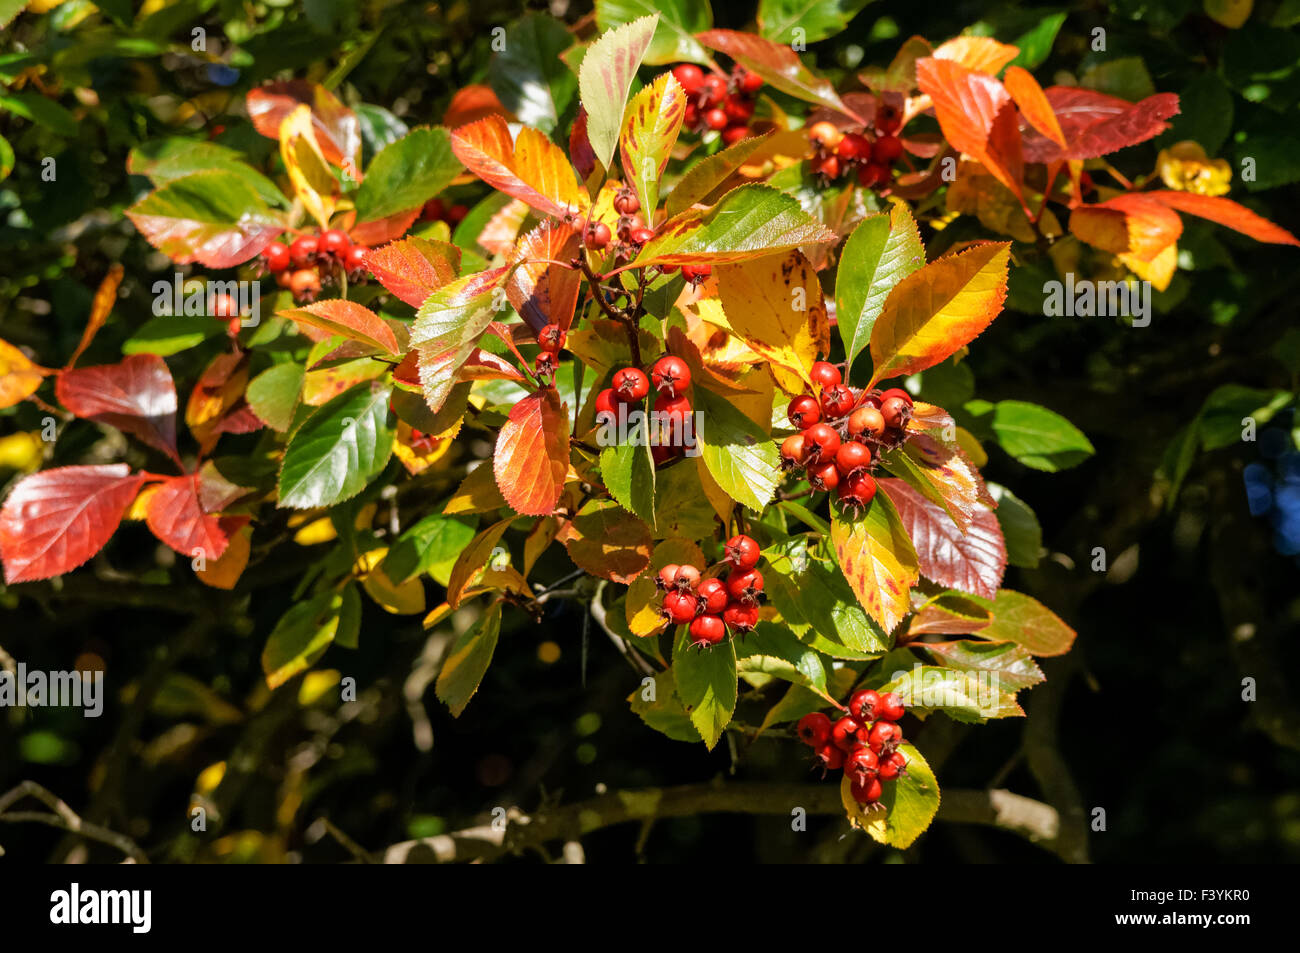 Red berries or pomes on firethorn shrub tree Stock Photo